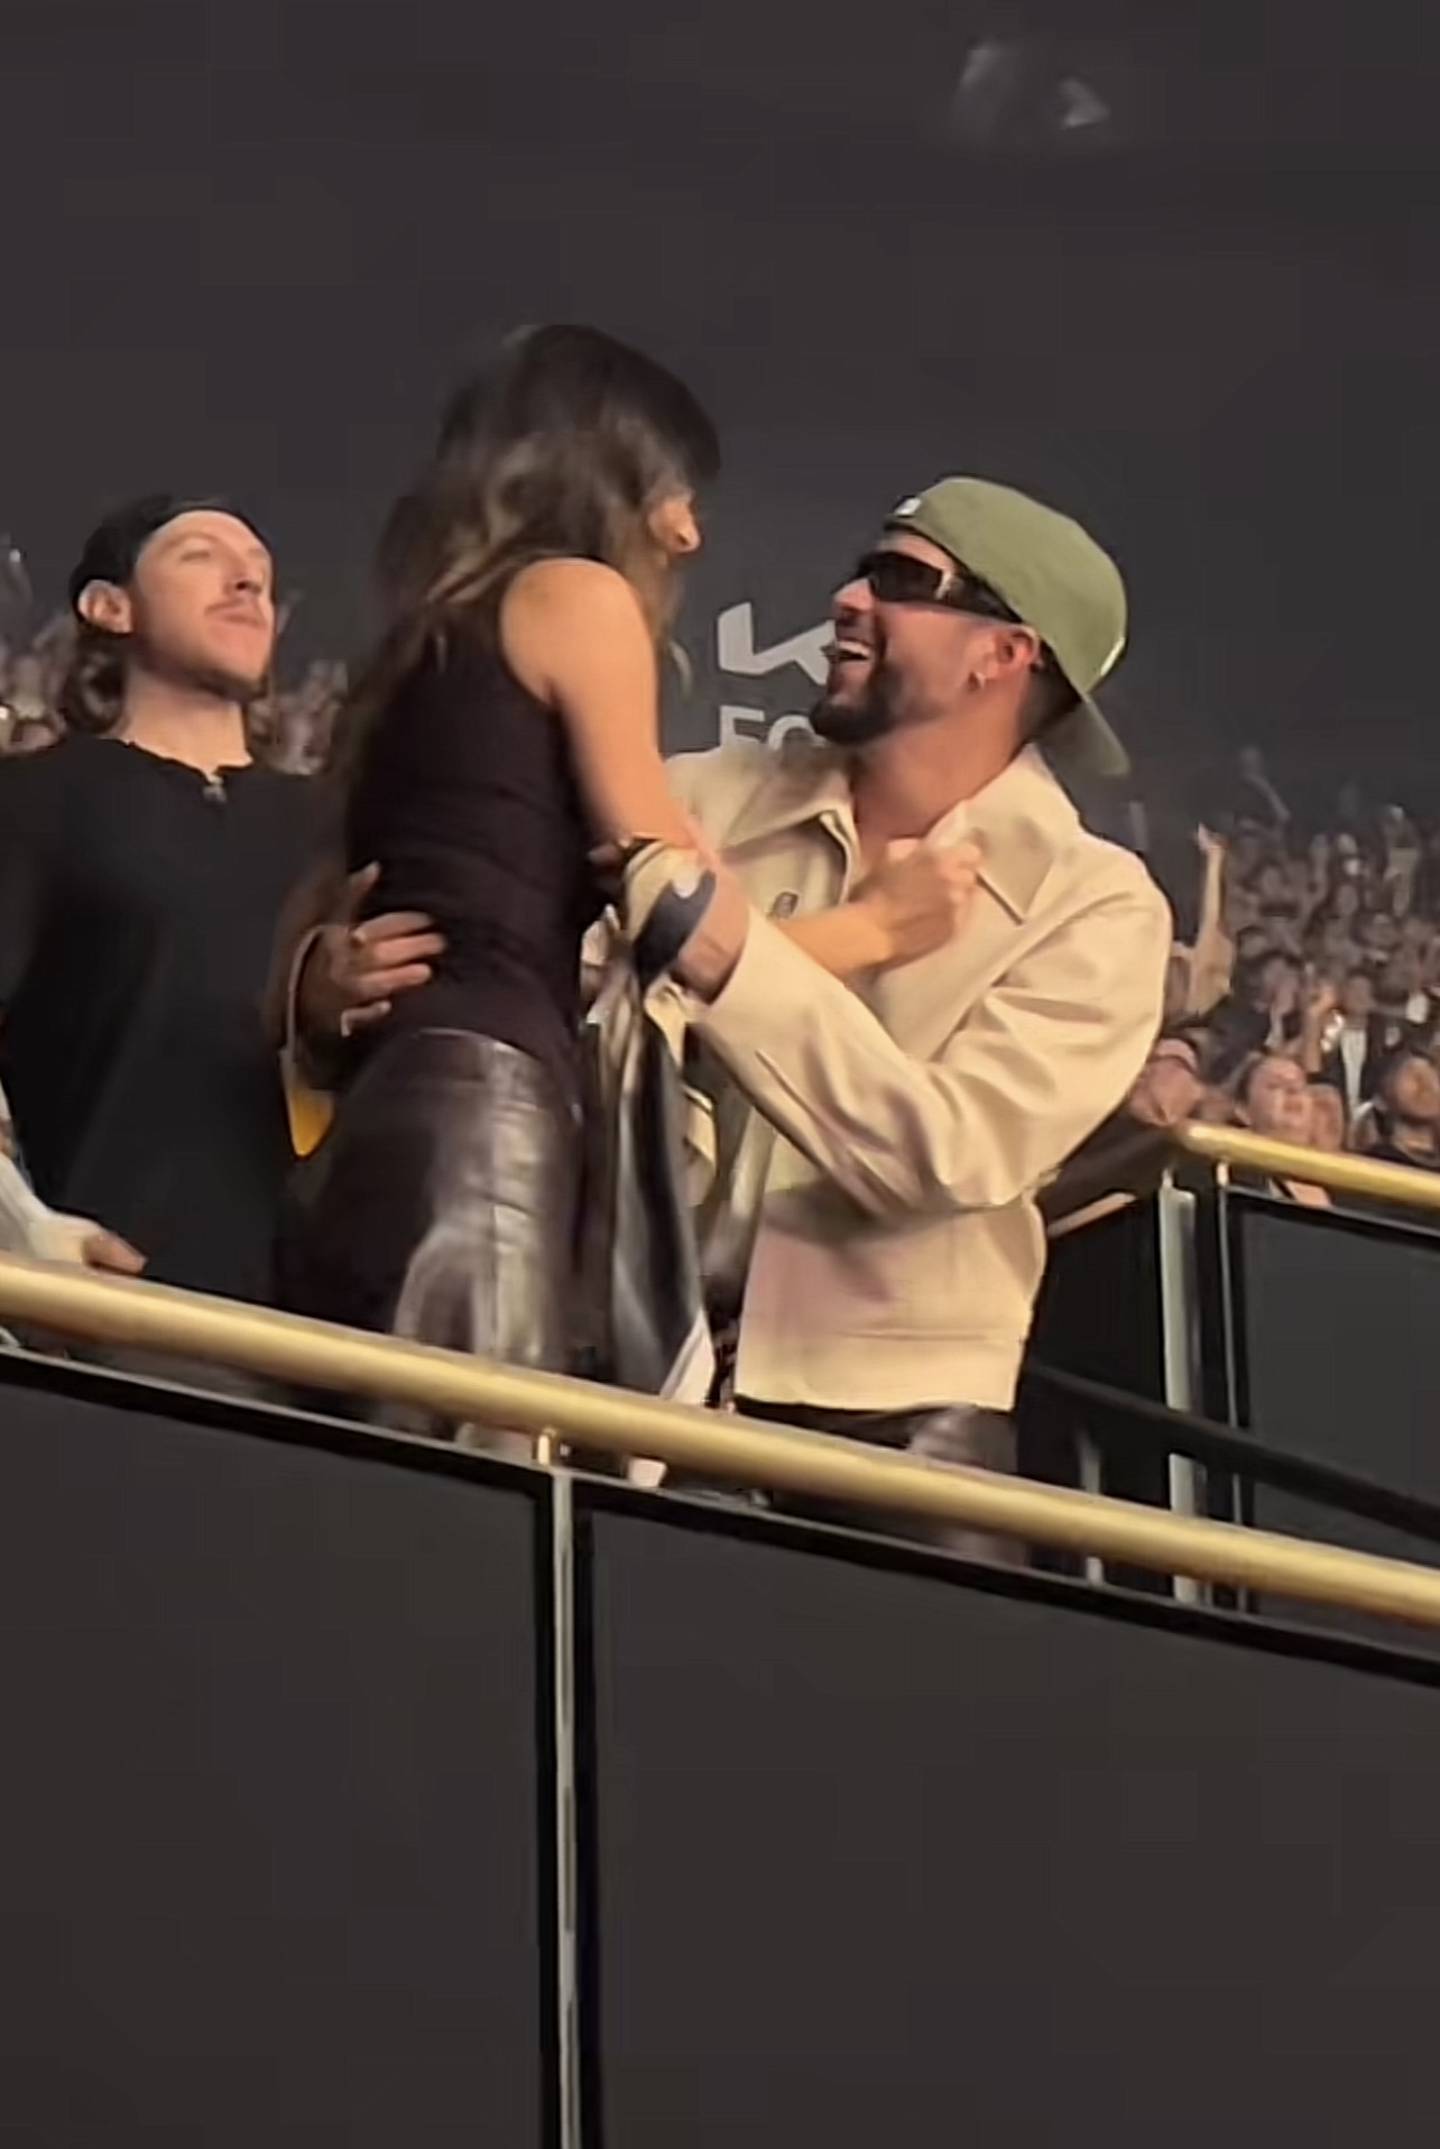 The couple attended a Drake concert